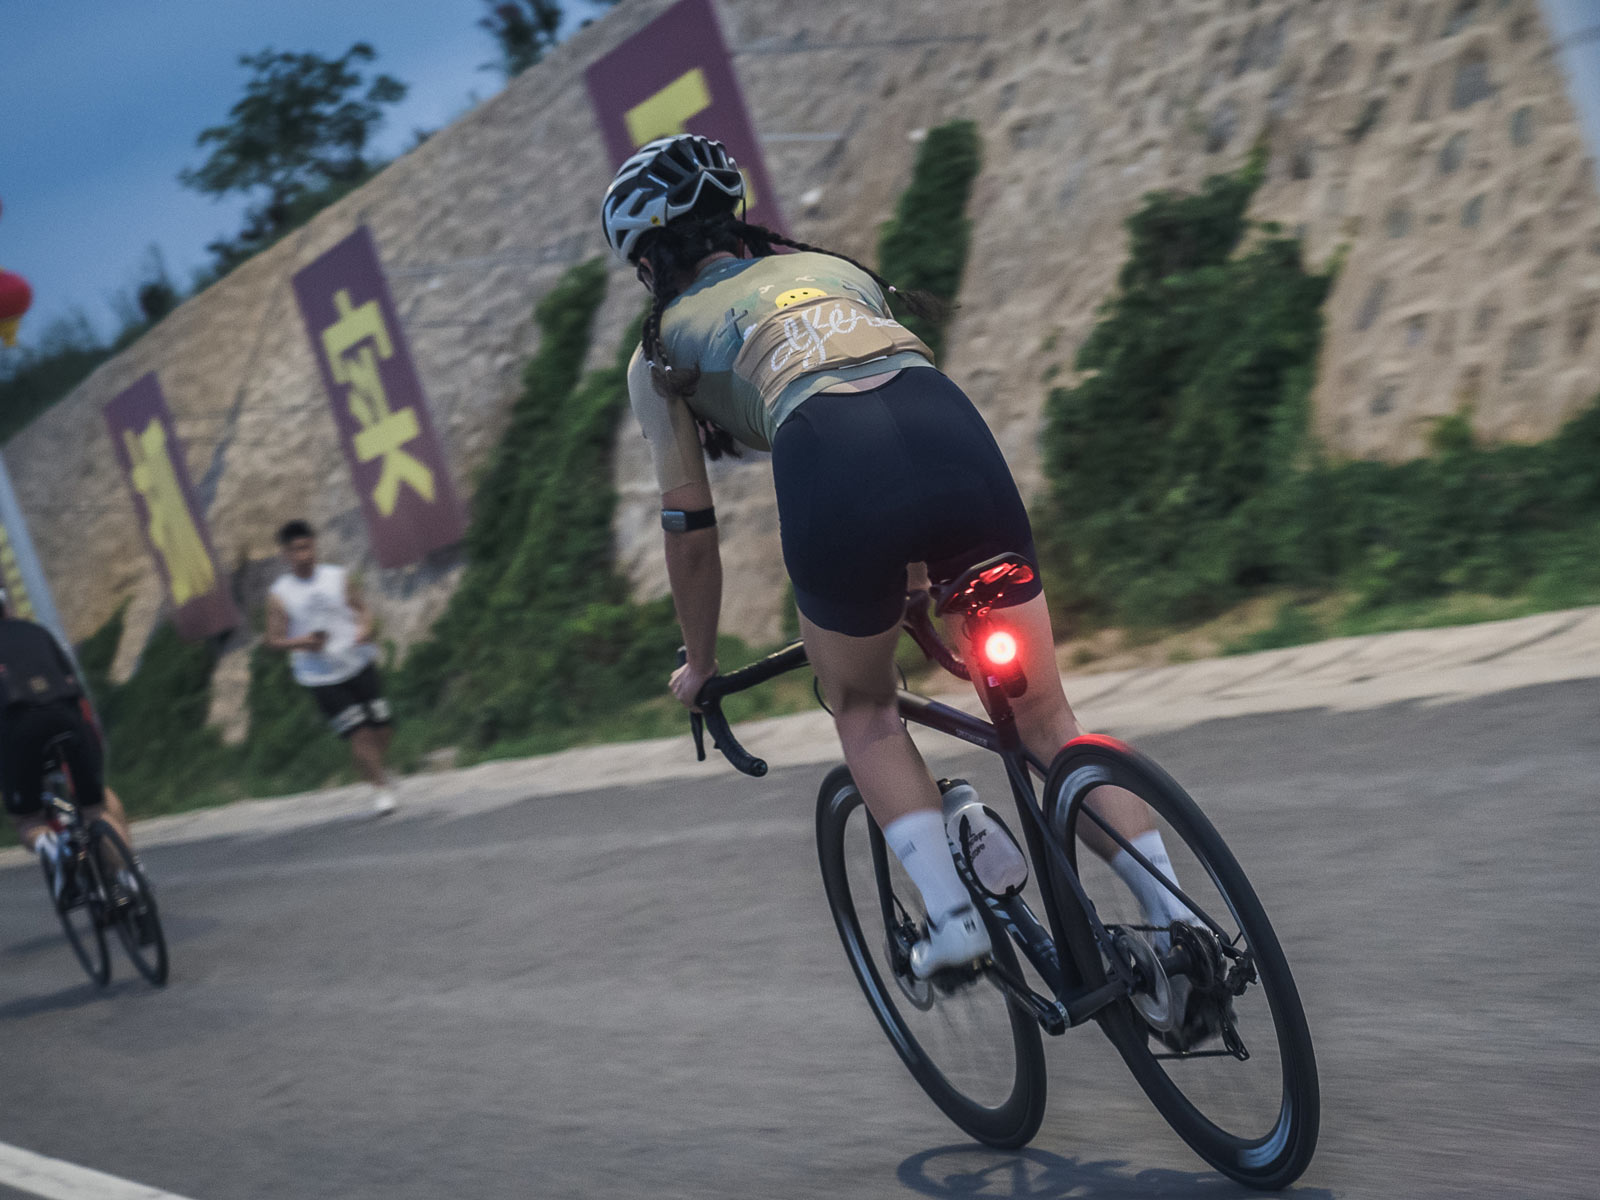 magene rear bike light with radar vehicle detection smart taillight connects to gps devices